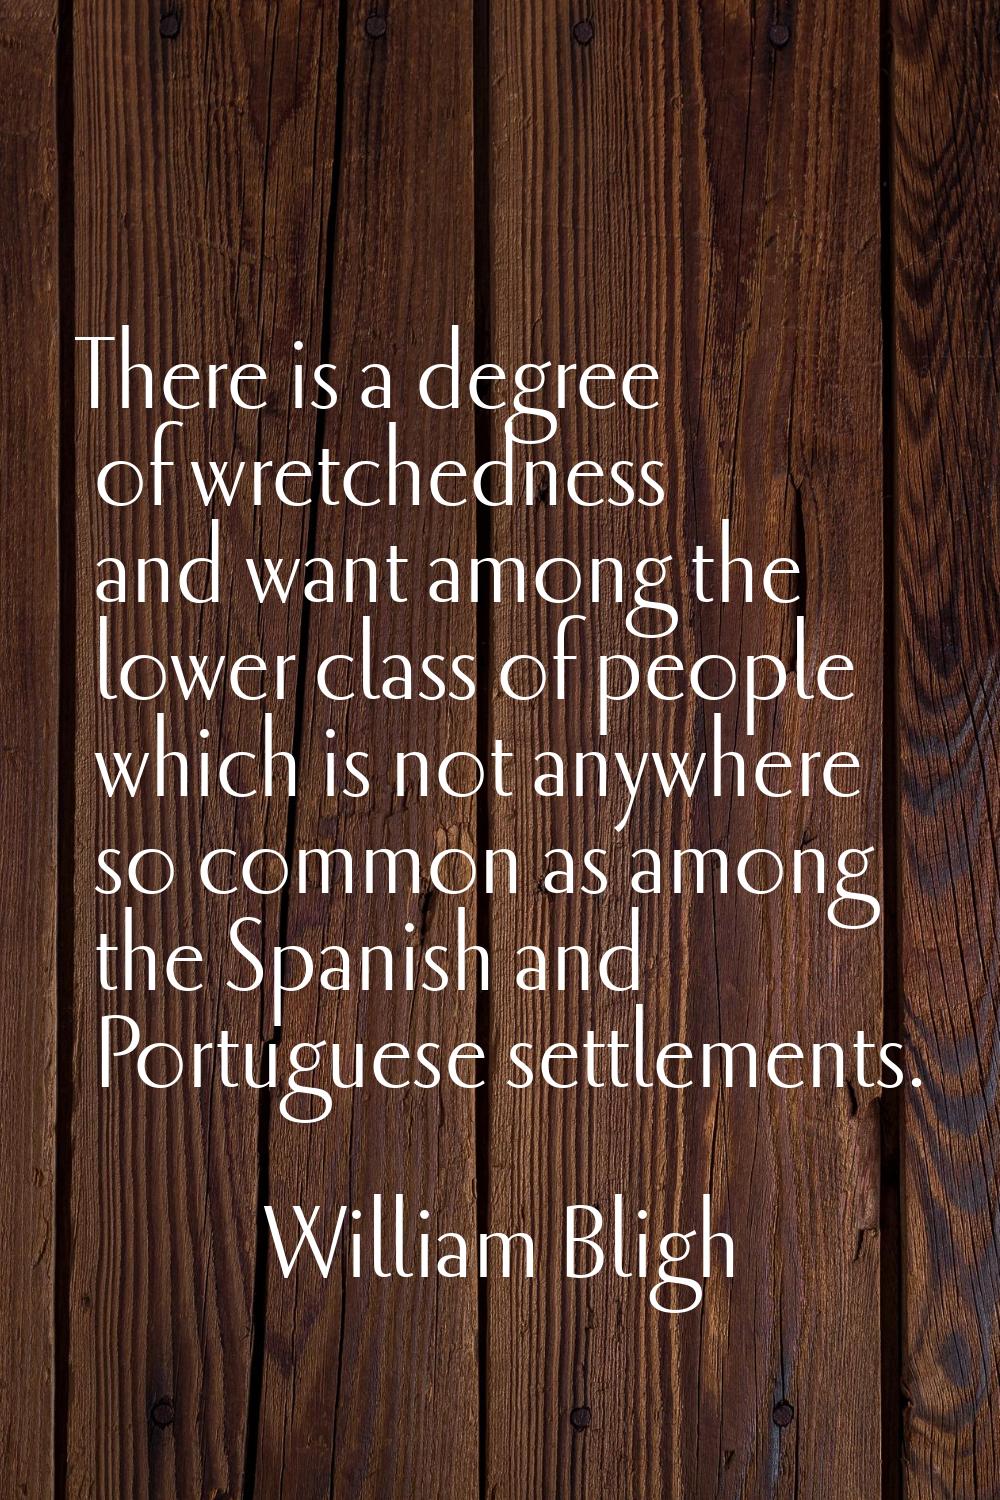 There is a degree of wretchedness and want among the lower class of people which is not anywhere so